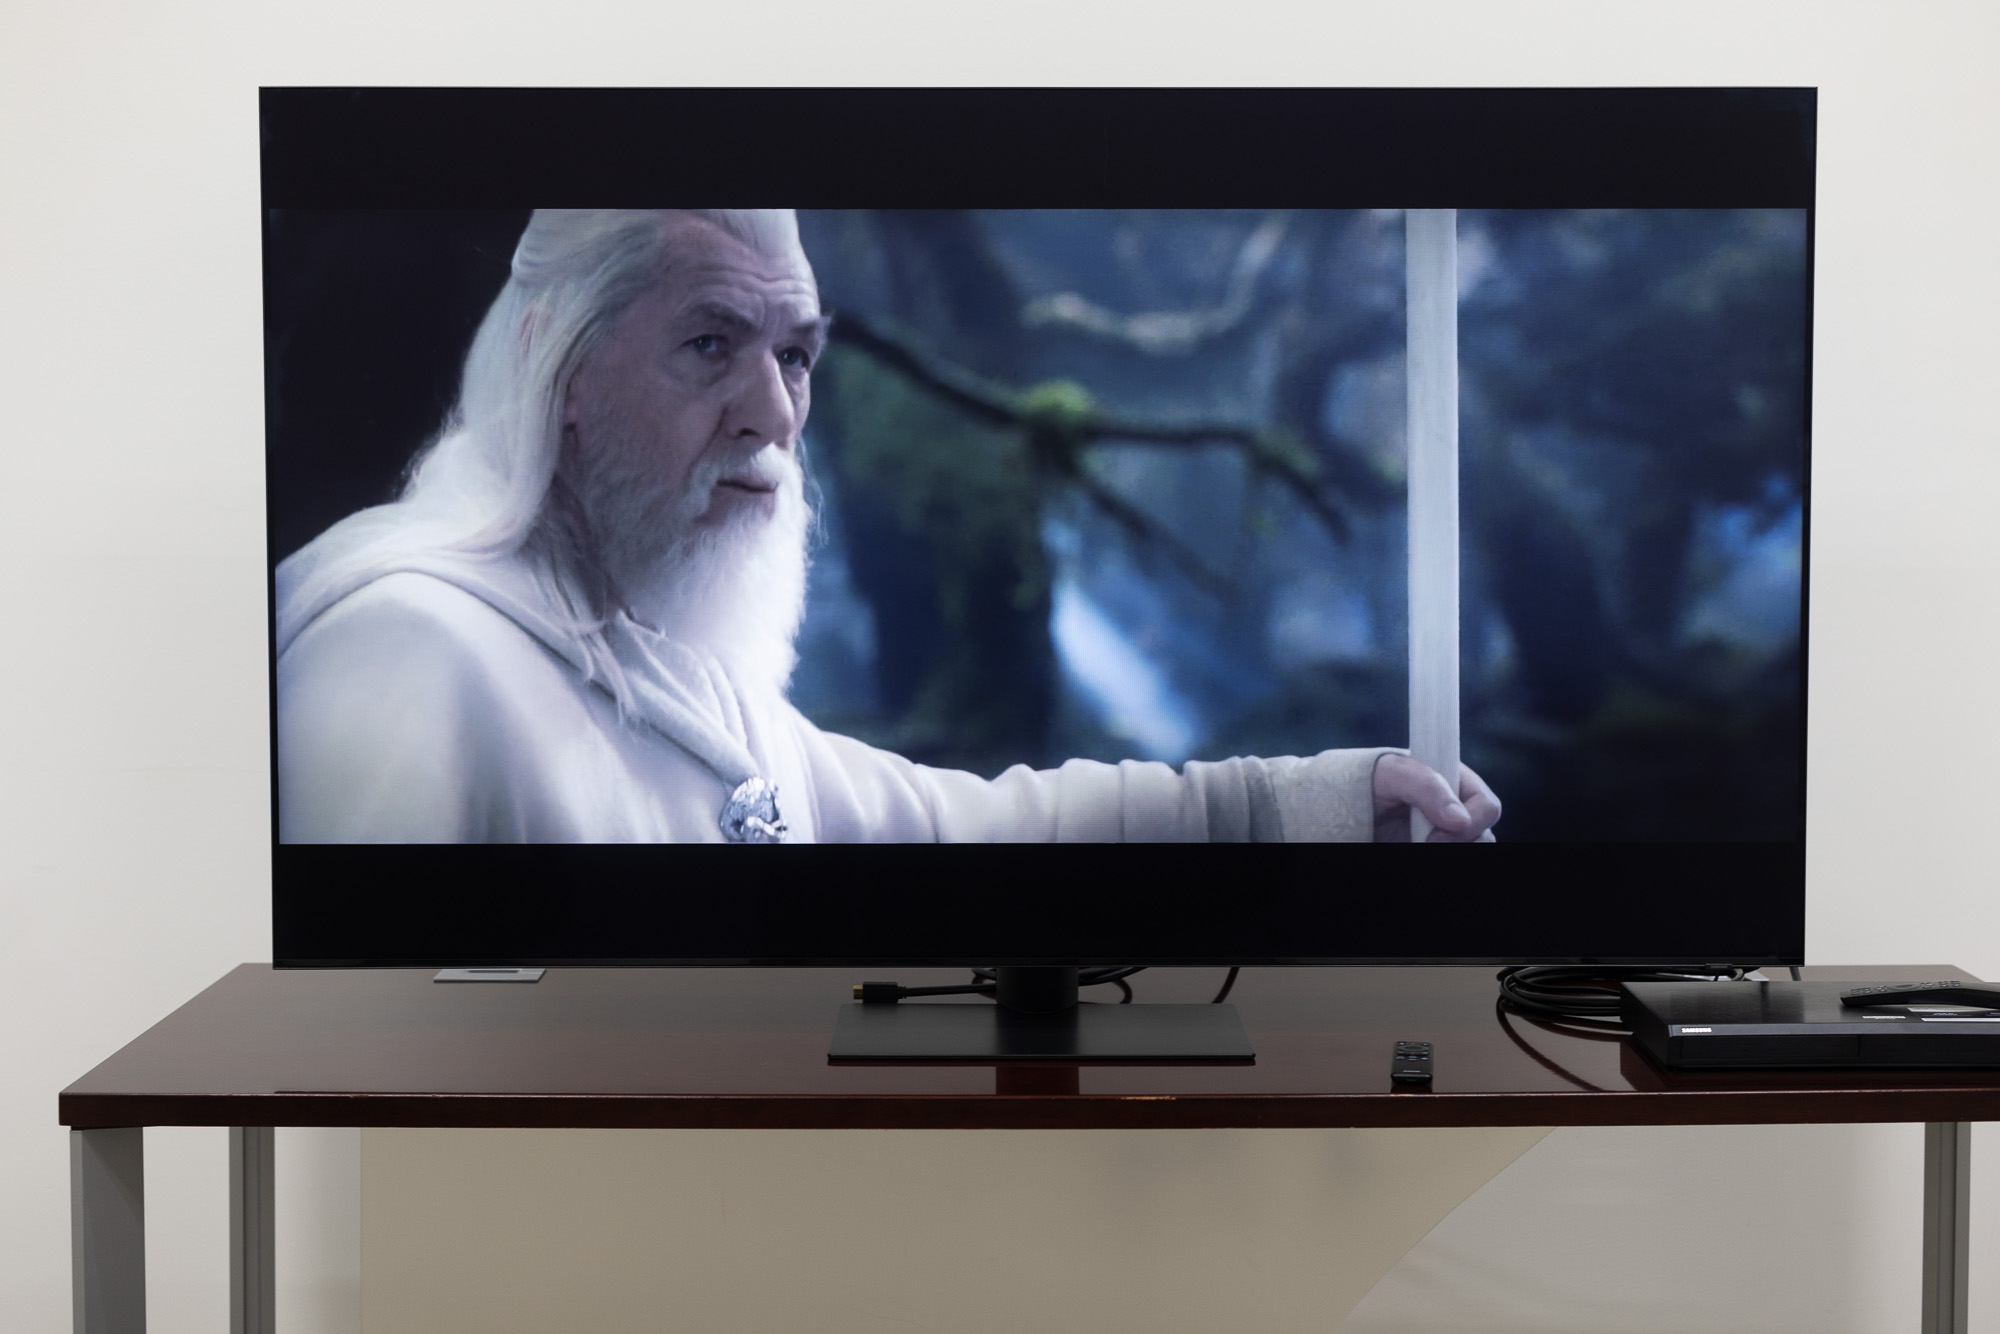 Xiaomi Smart TV X50 review: A good, no-compromise 4K experience